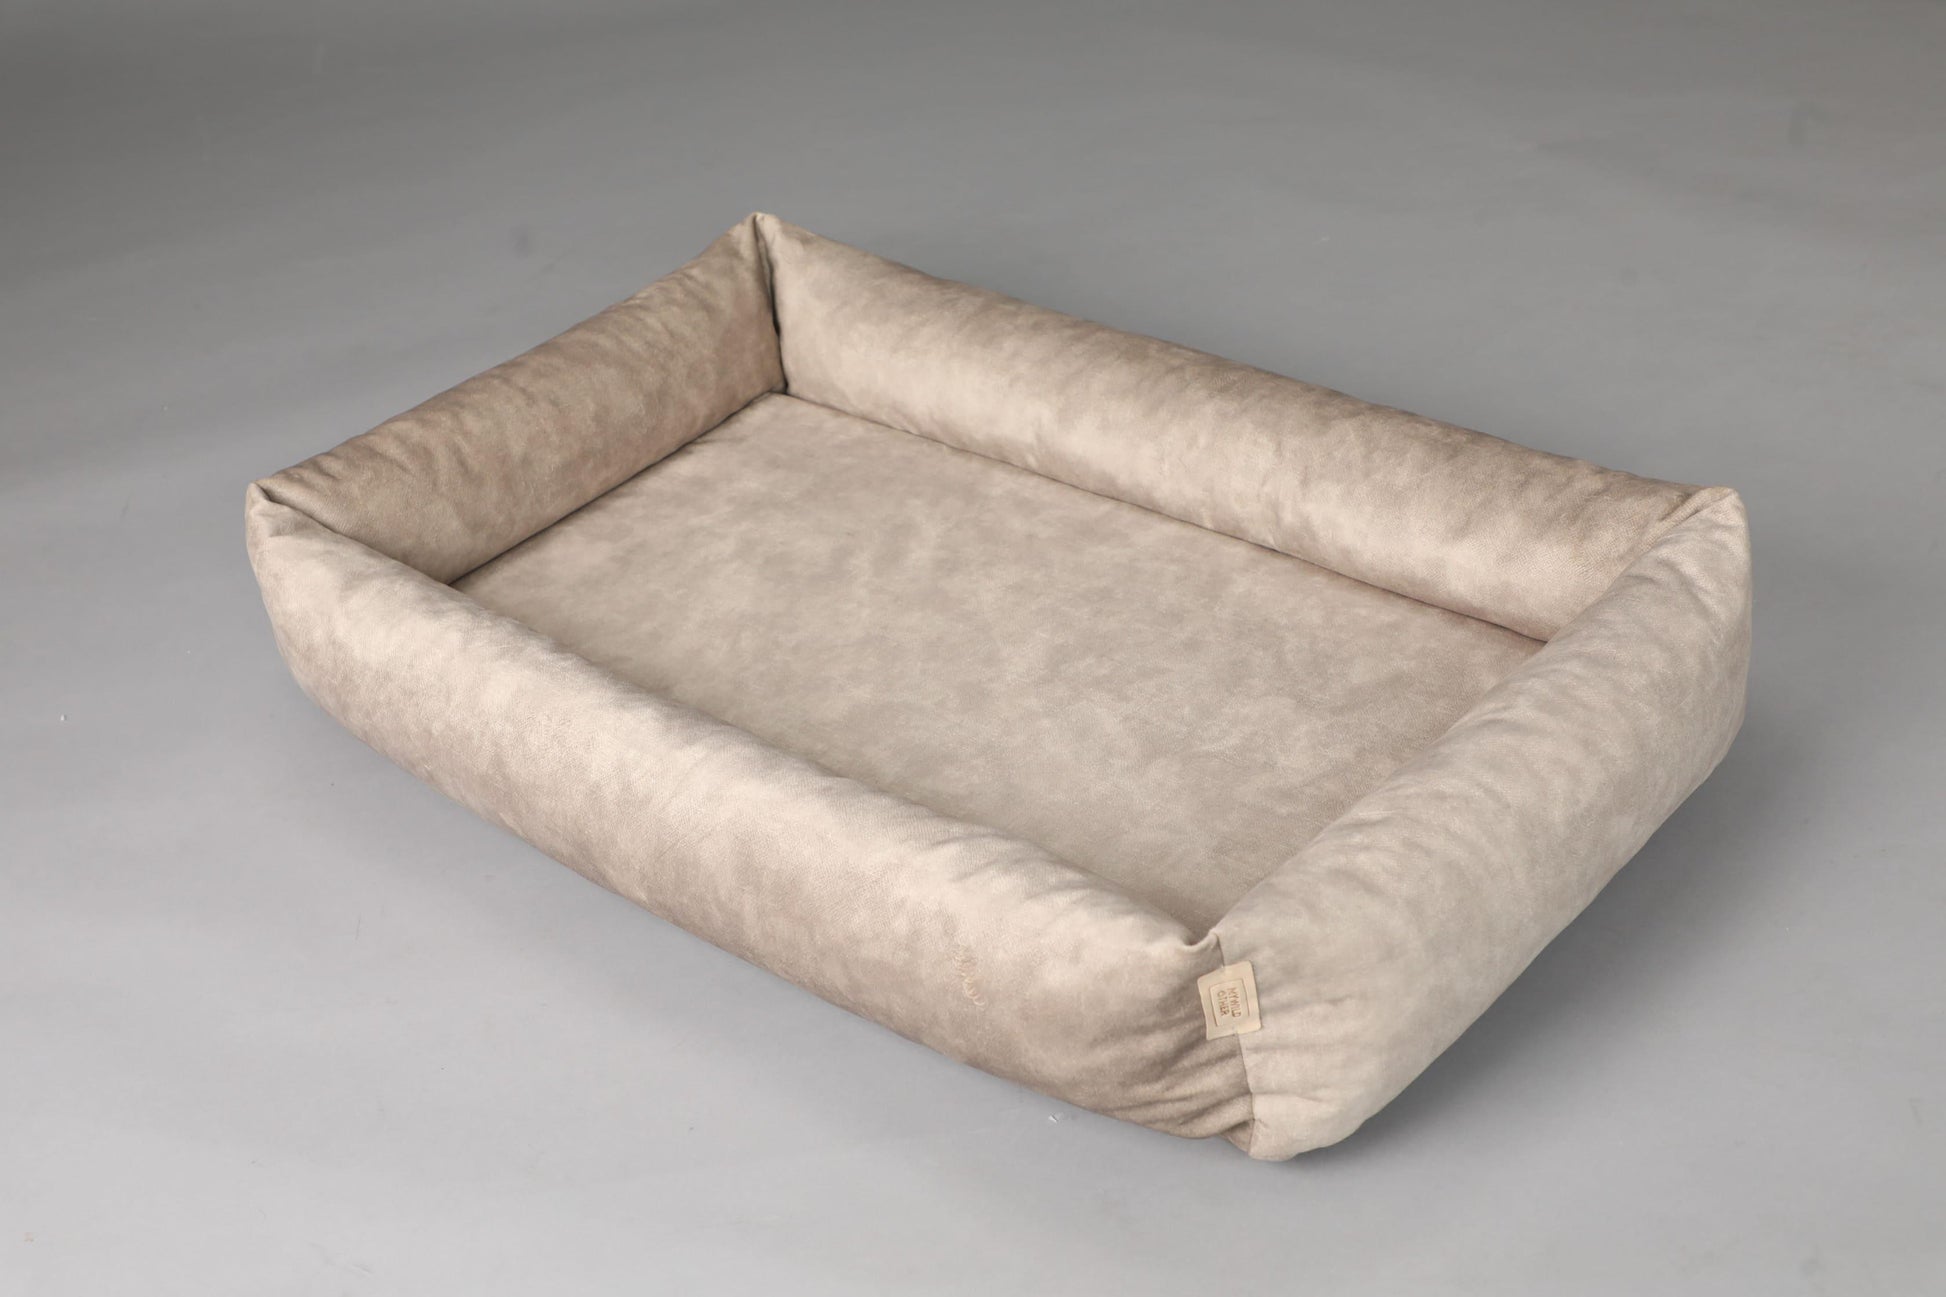 Premium dog bed with sides | 2-sided | BEIGE - premium dog goods handmade in Europe by My Wild Other